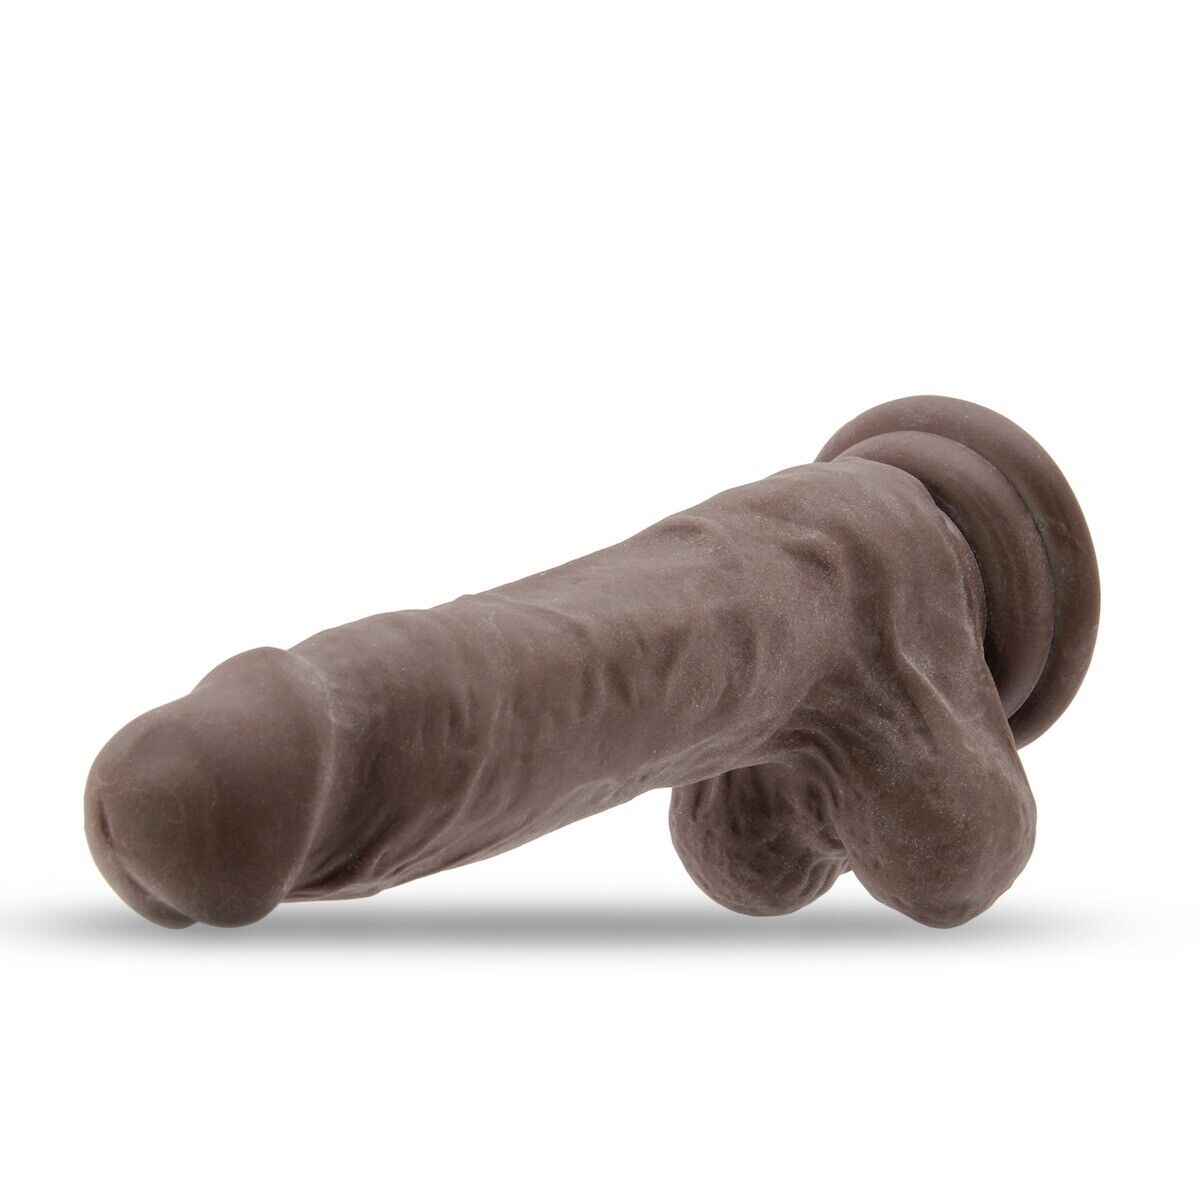 Soft Posable Bendable Realistic Black G-spot Anal Dildo Dong Sex Toy